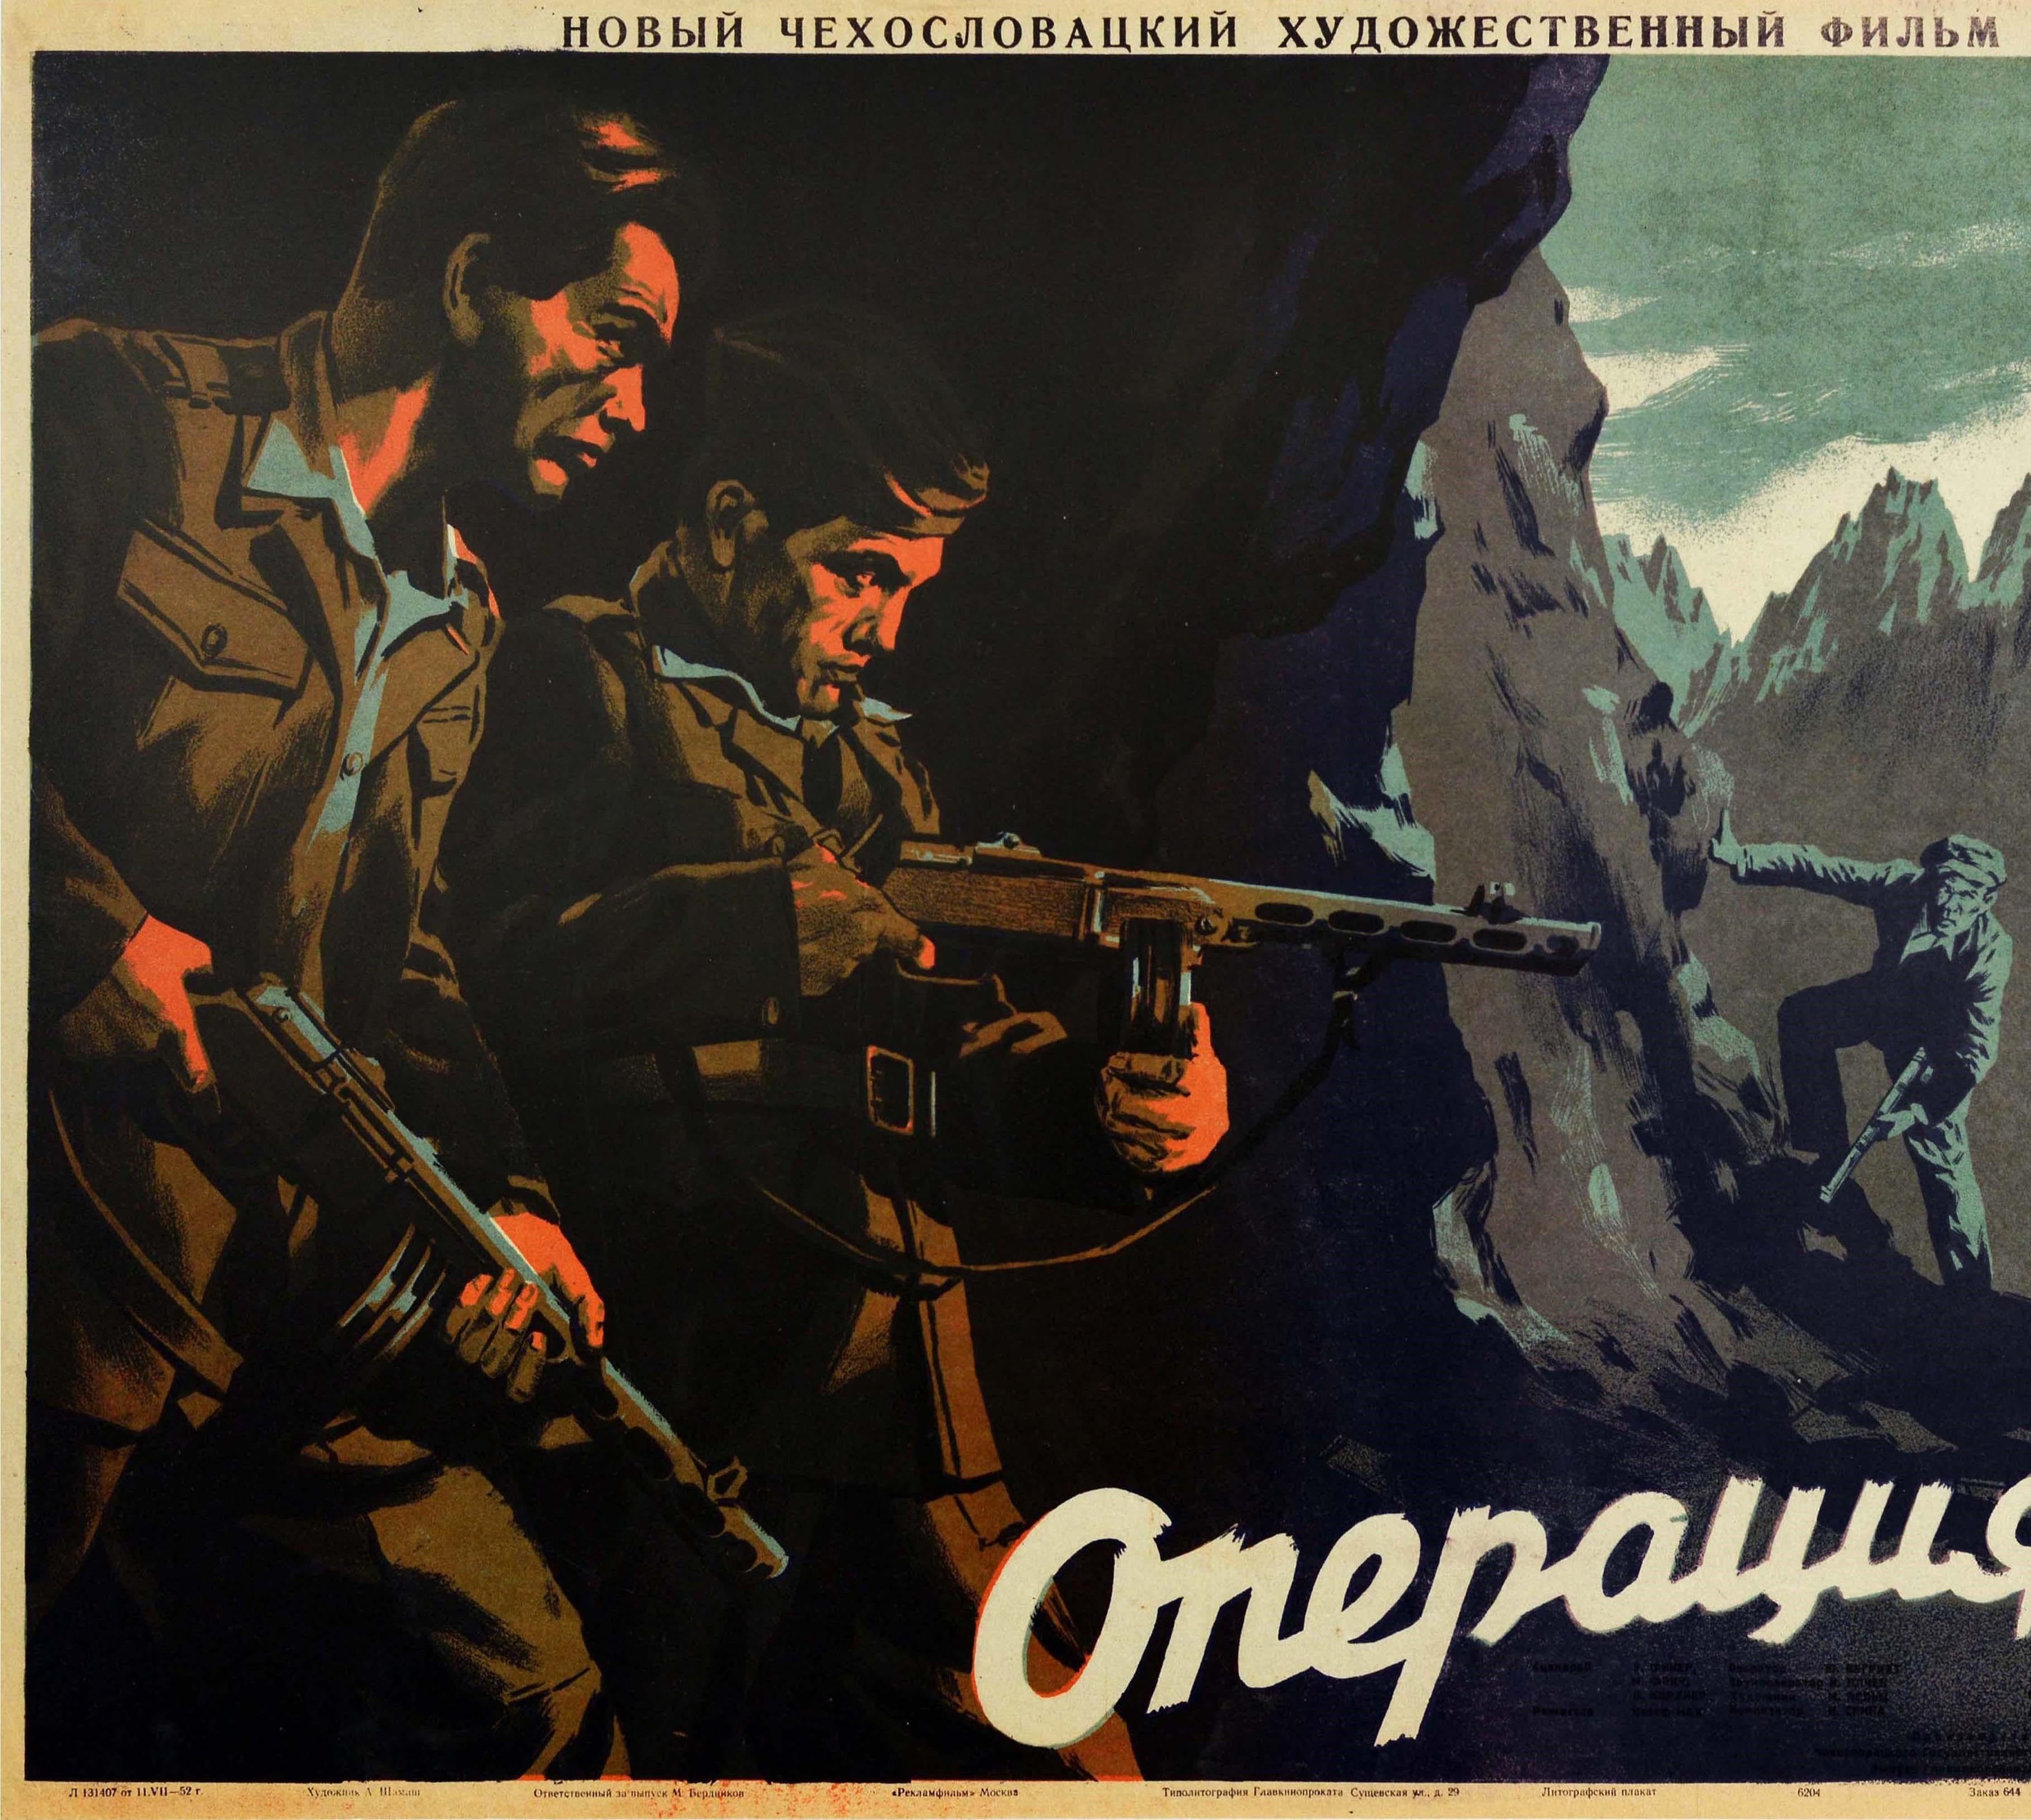 Original Vintage Film Poster Action B Czechoslovakian WWII Movie Insurgent Army - Print by A. Shamash